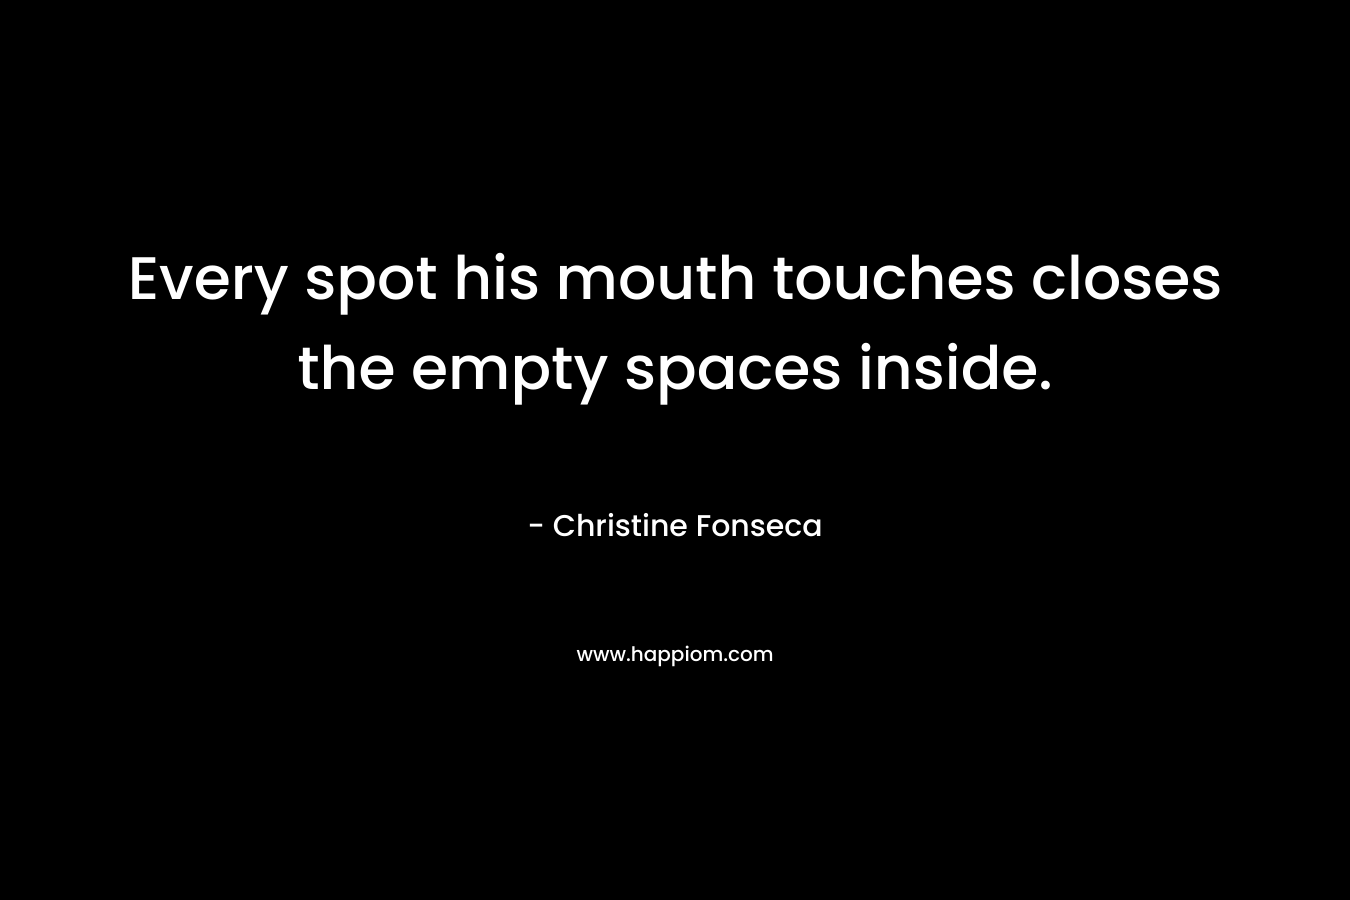 Every spot his mouth touches closes the empty spaces inside. – Christine Fonseca